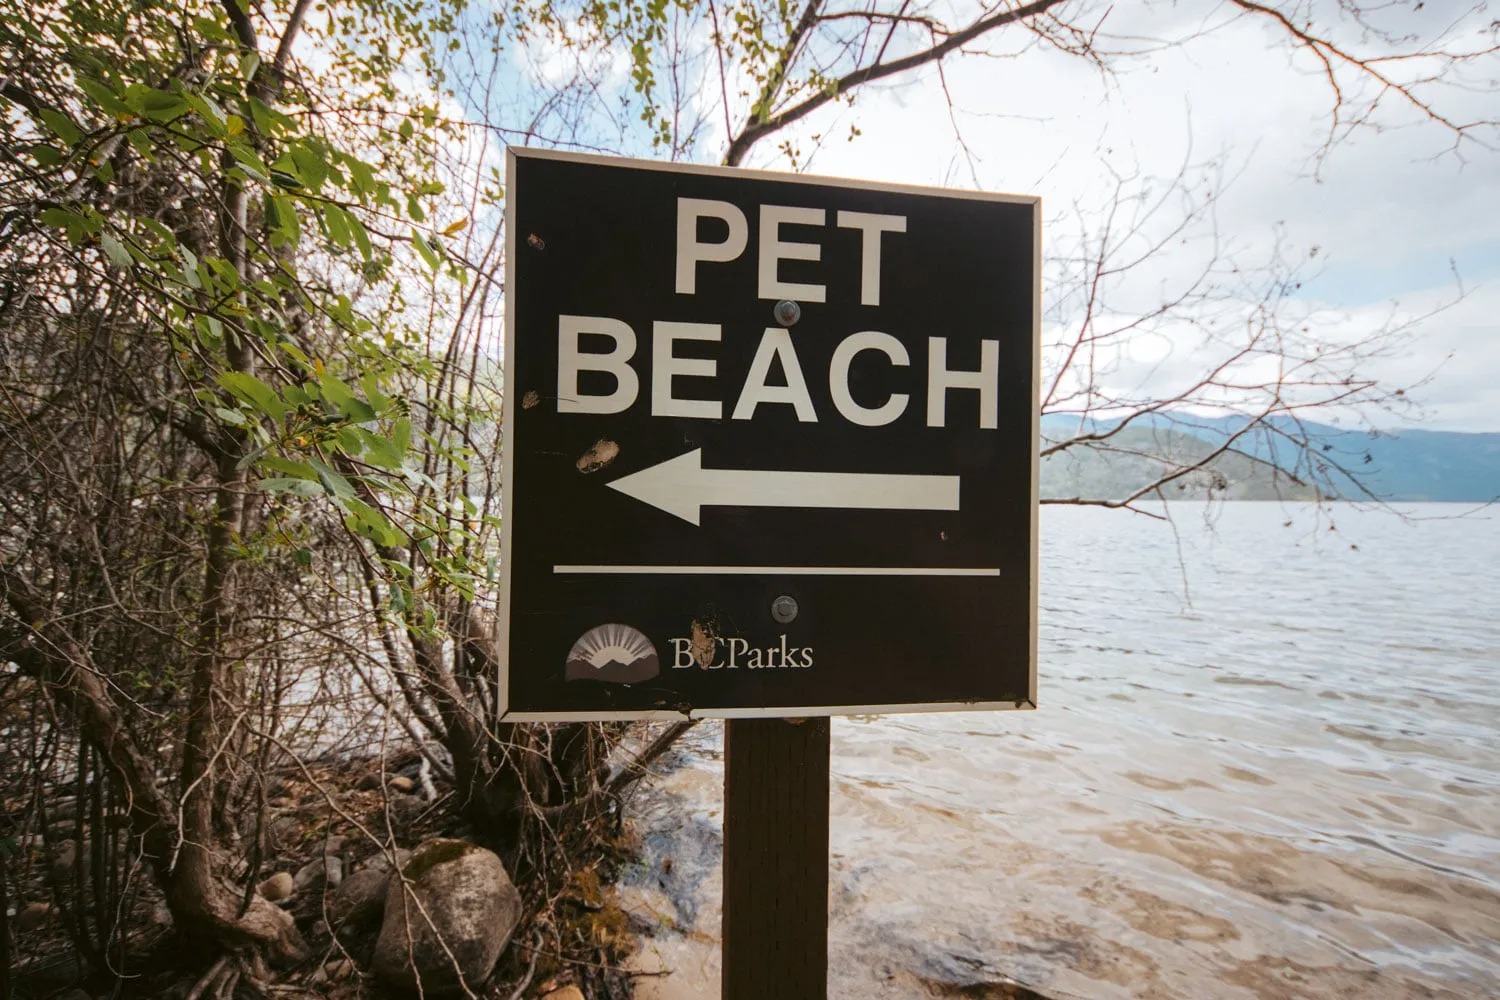 Pet beach sign pointing to the left